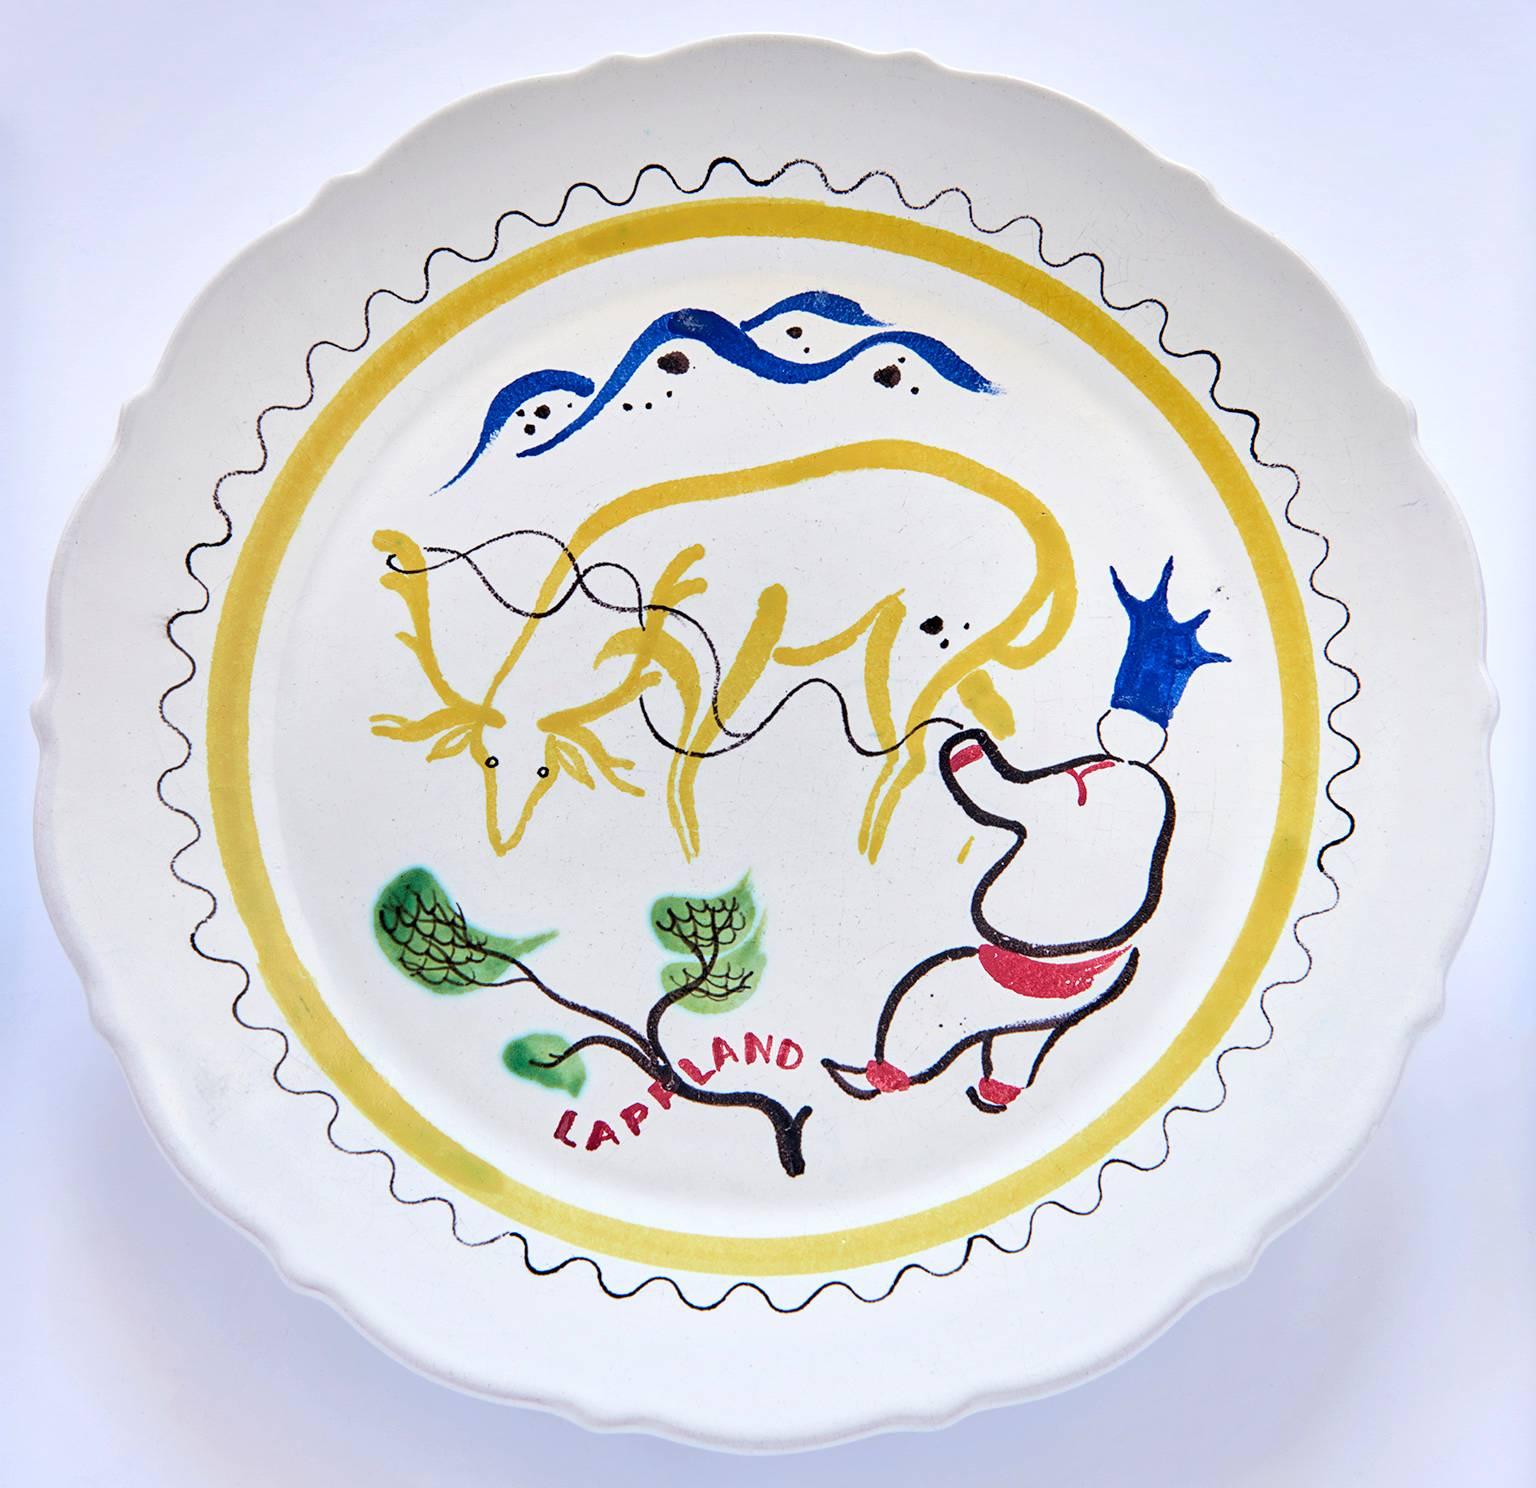 This set of faience dinner plates (nine altogether, though only eight appear in the group photograph) was created by Stig Lindberg in the late 1940s to celebrate the various regions of Sweden. All of the paintings are done in Stig Lindberg's